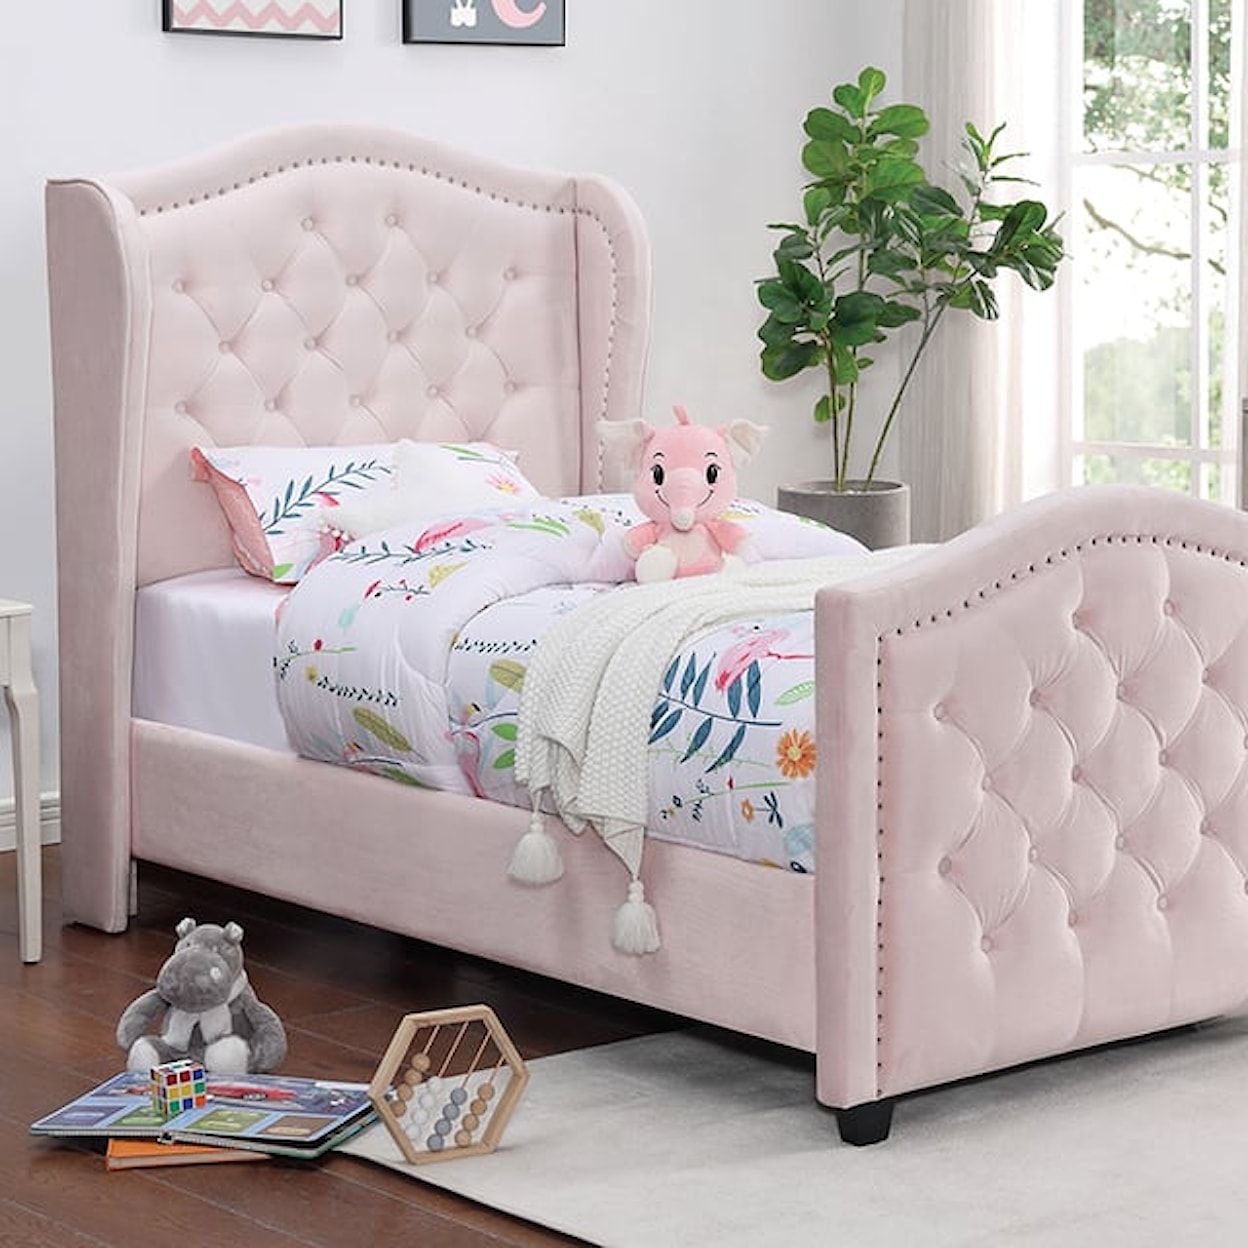 Furniture of America Kerran Upholstered Youth Twin Bed 